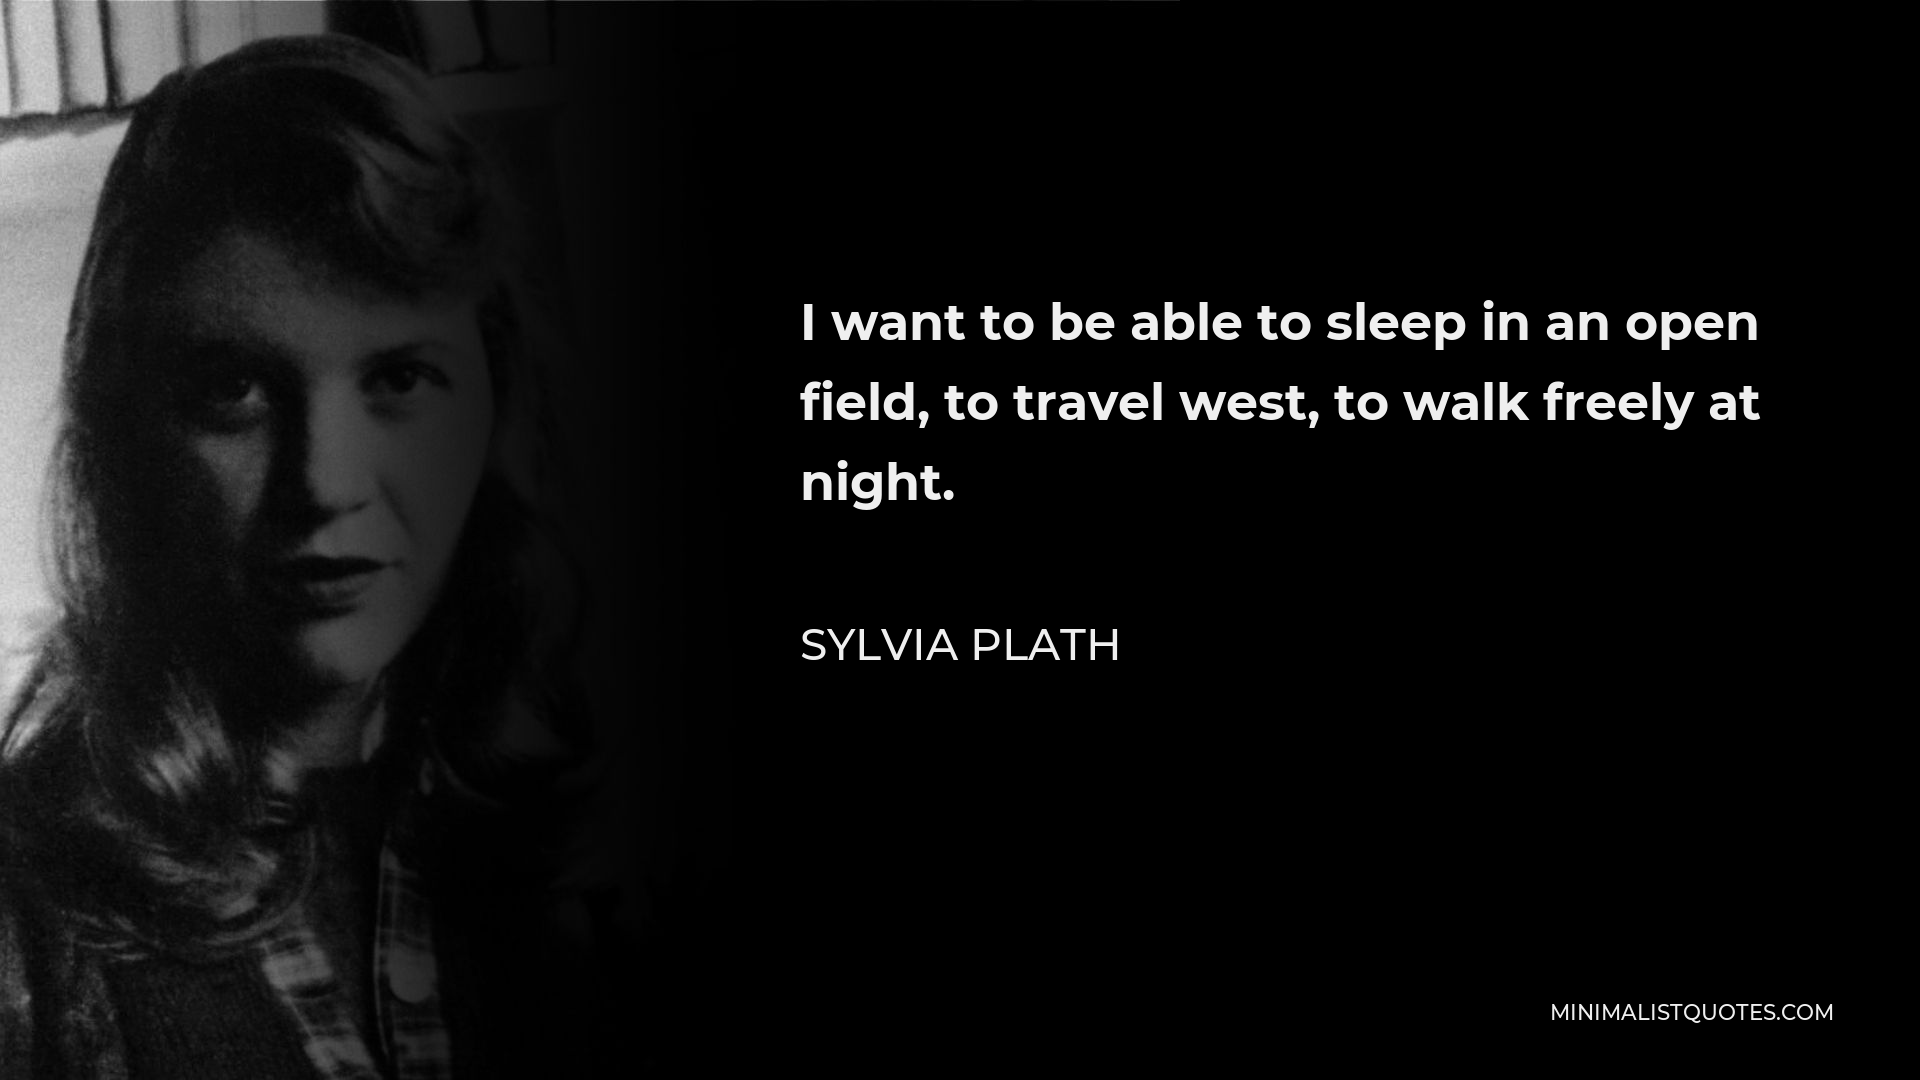 Sylvia Plath Quote - I want to be able to sleep in an open field, to travel west, to walk freely at night.